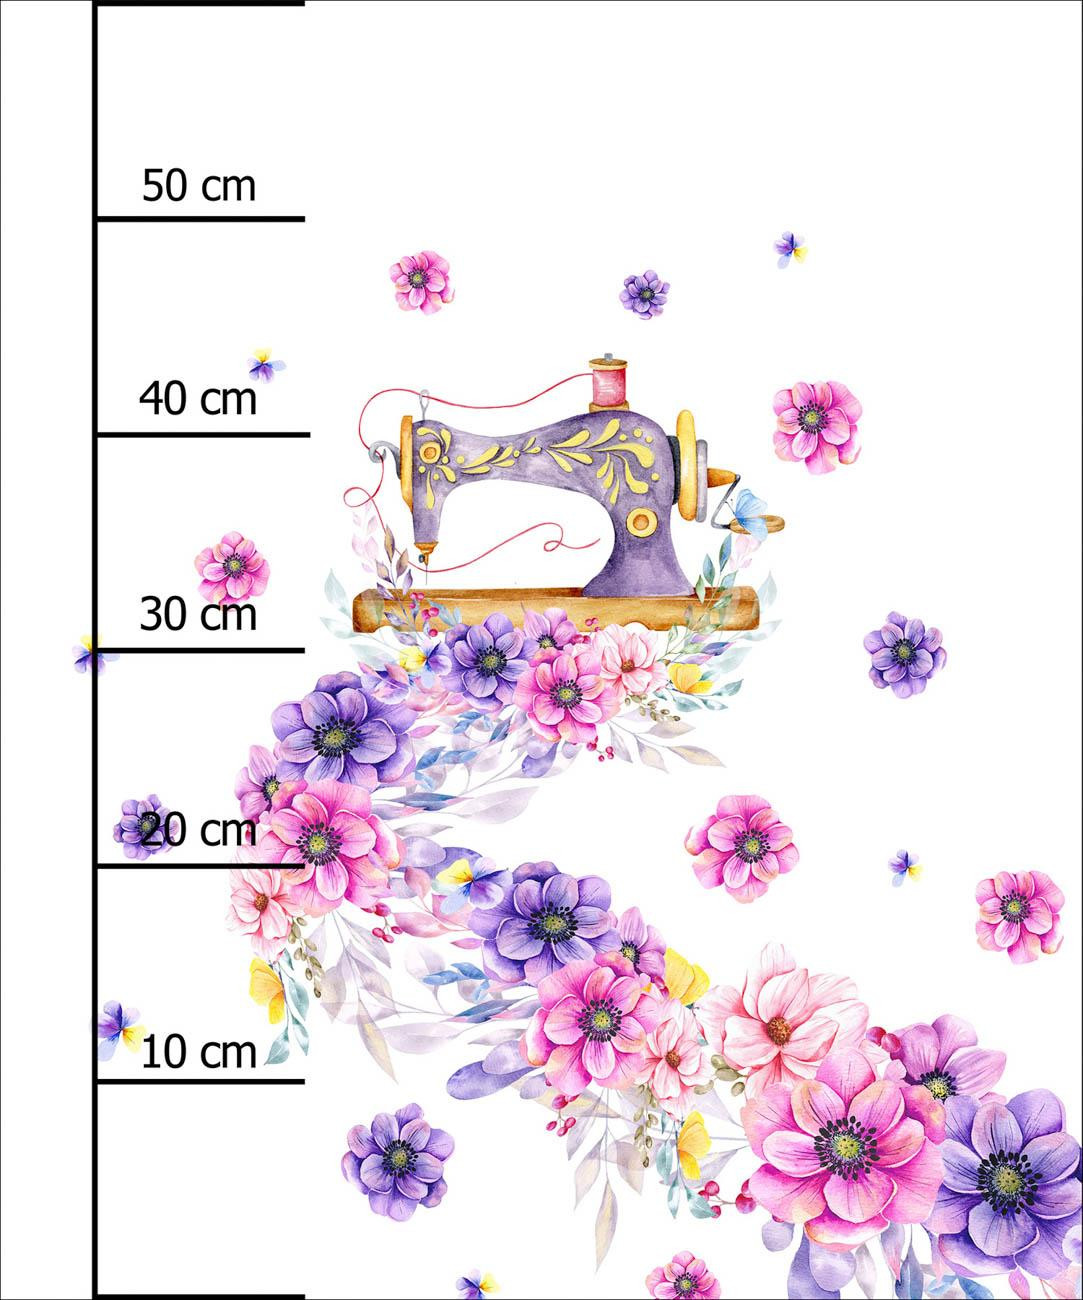 SEWING MACHINE AND FLOWERS - panel (60cm x 50cm) lycra 300g